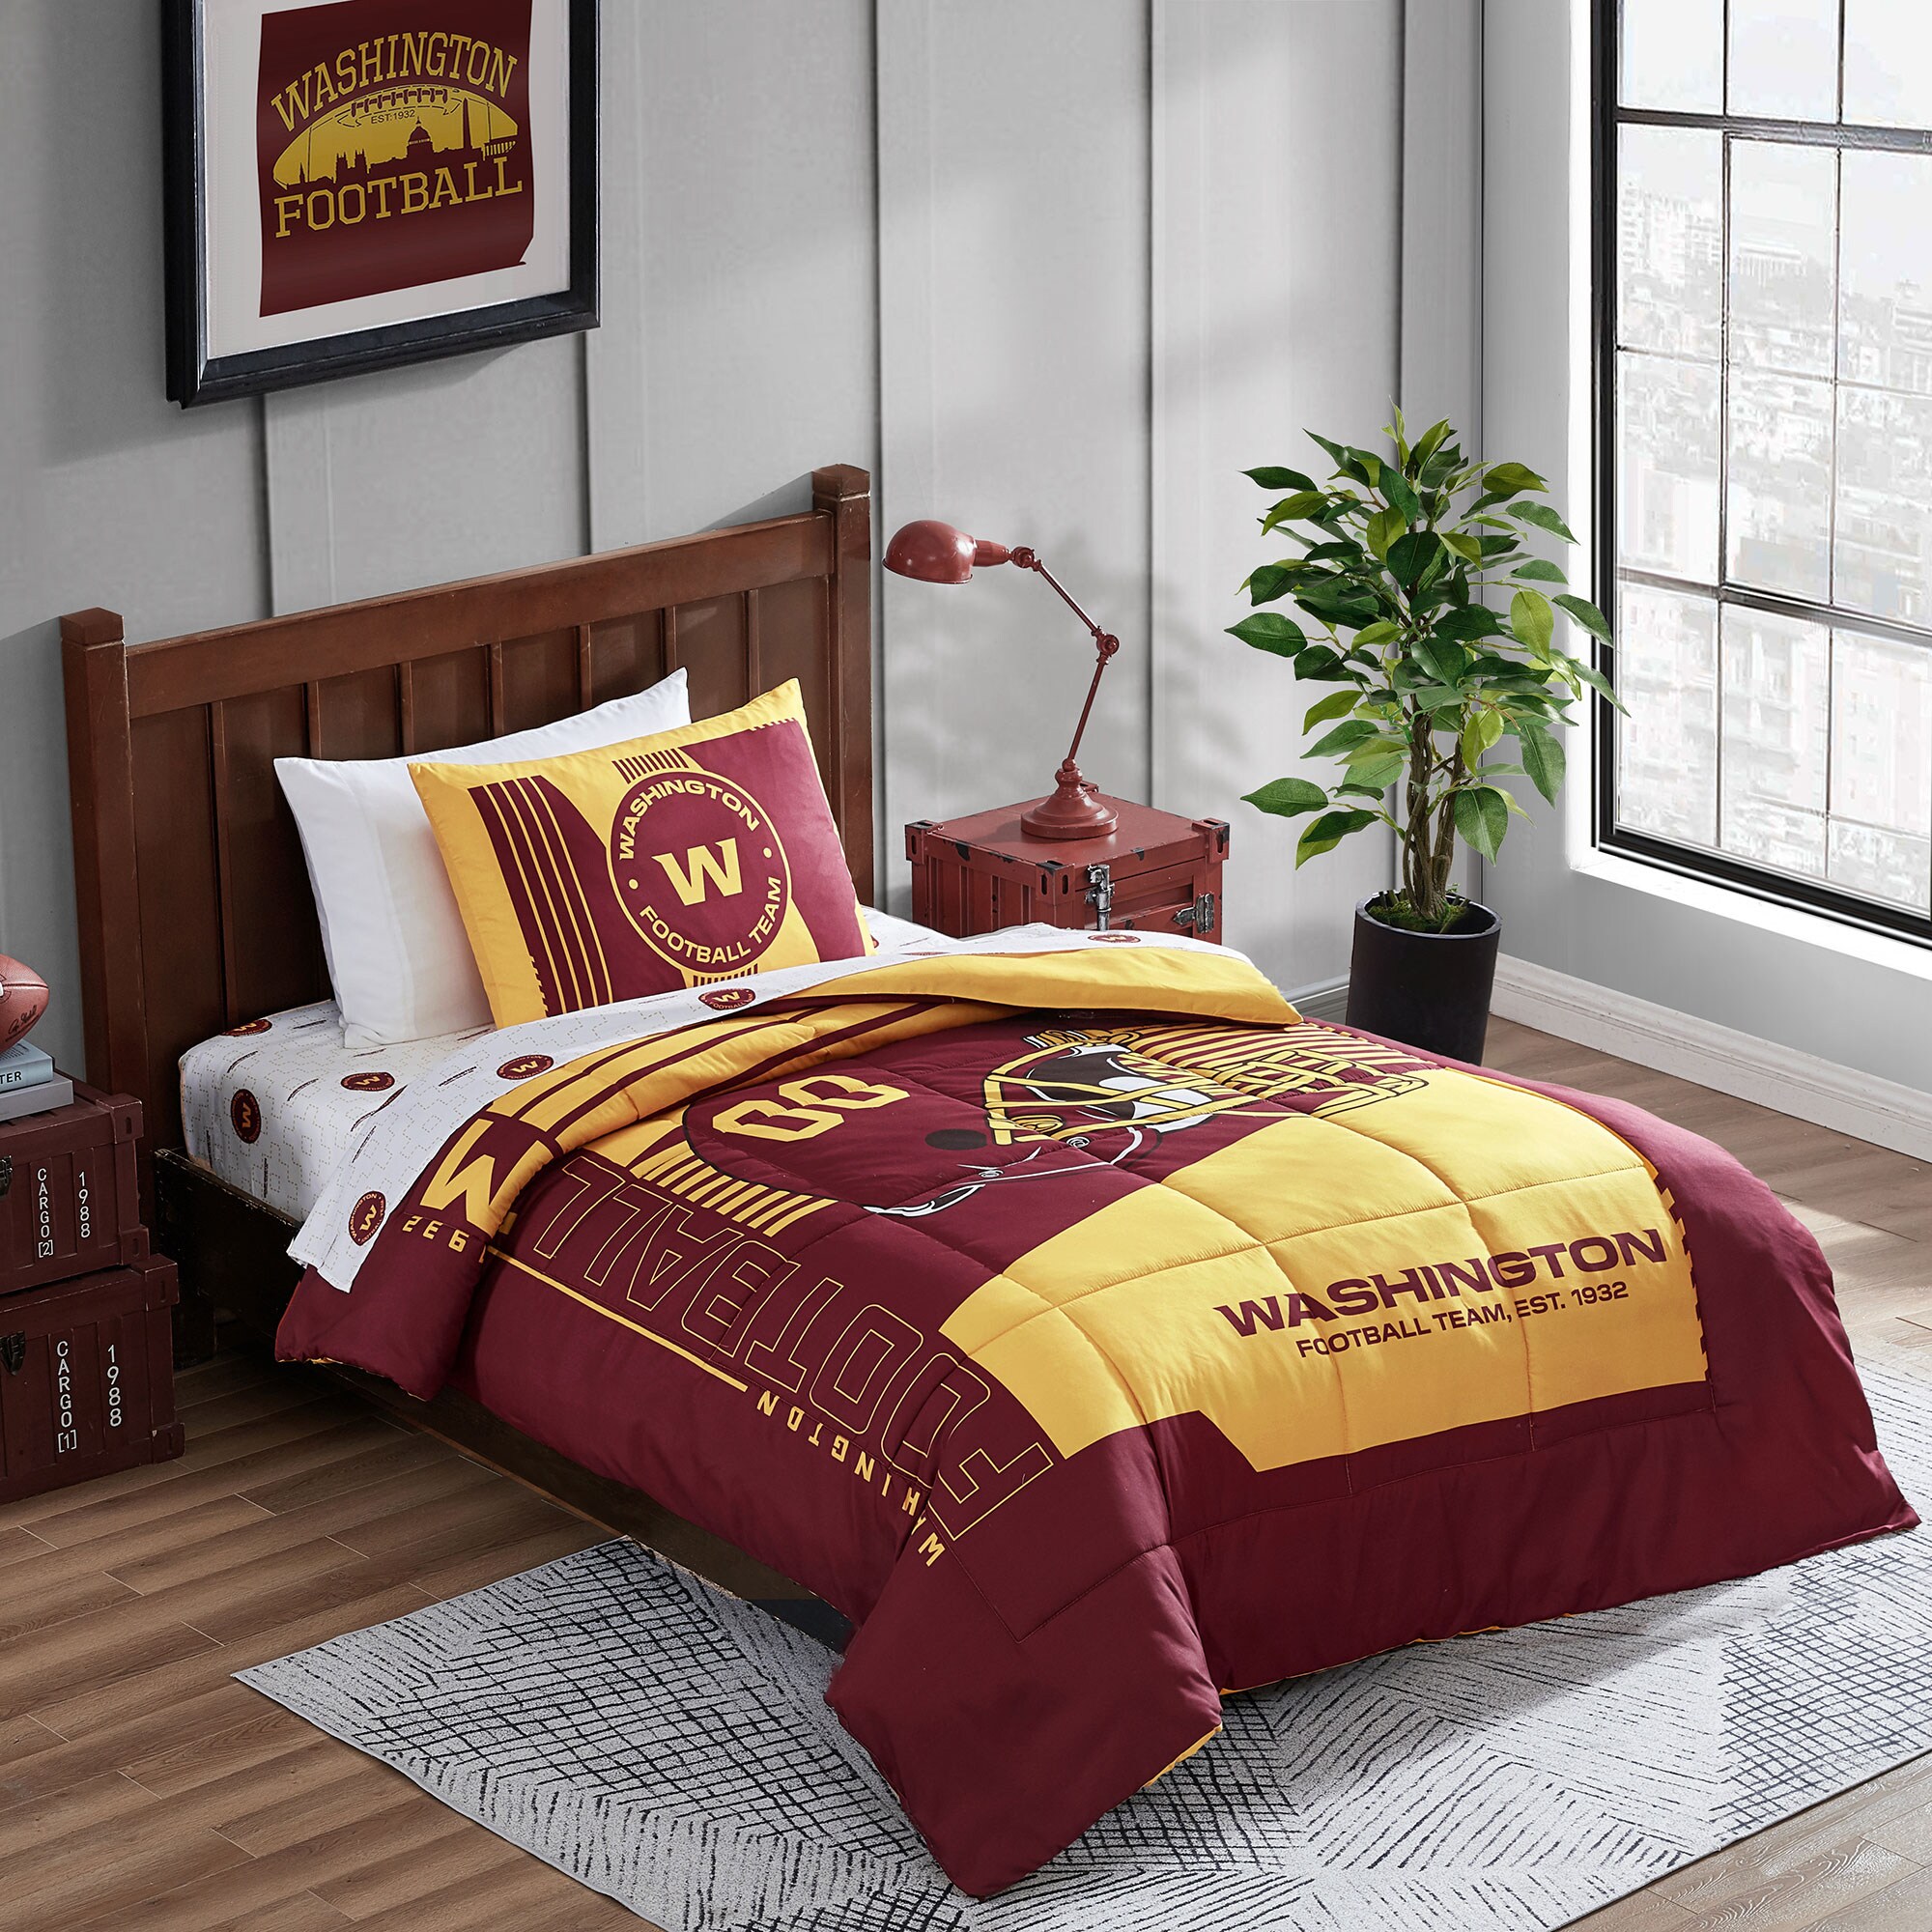 Favourite Football Teams Lampshades Ideal To Match Football Quilts & Bedspreads 